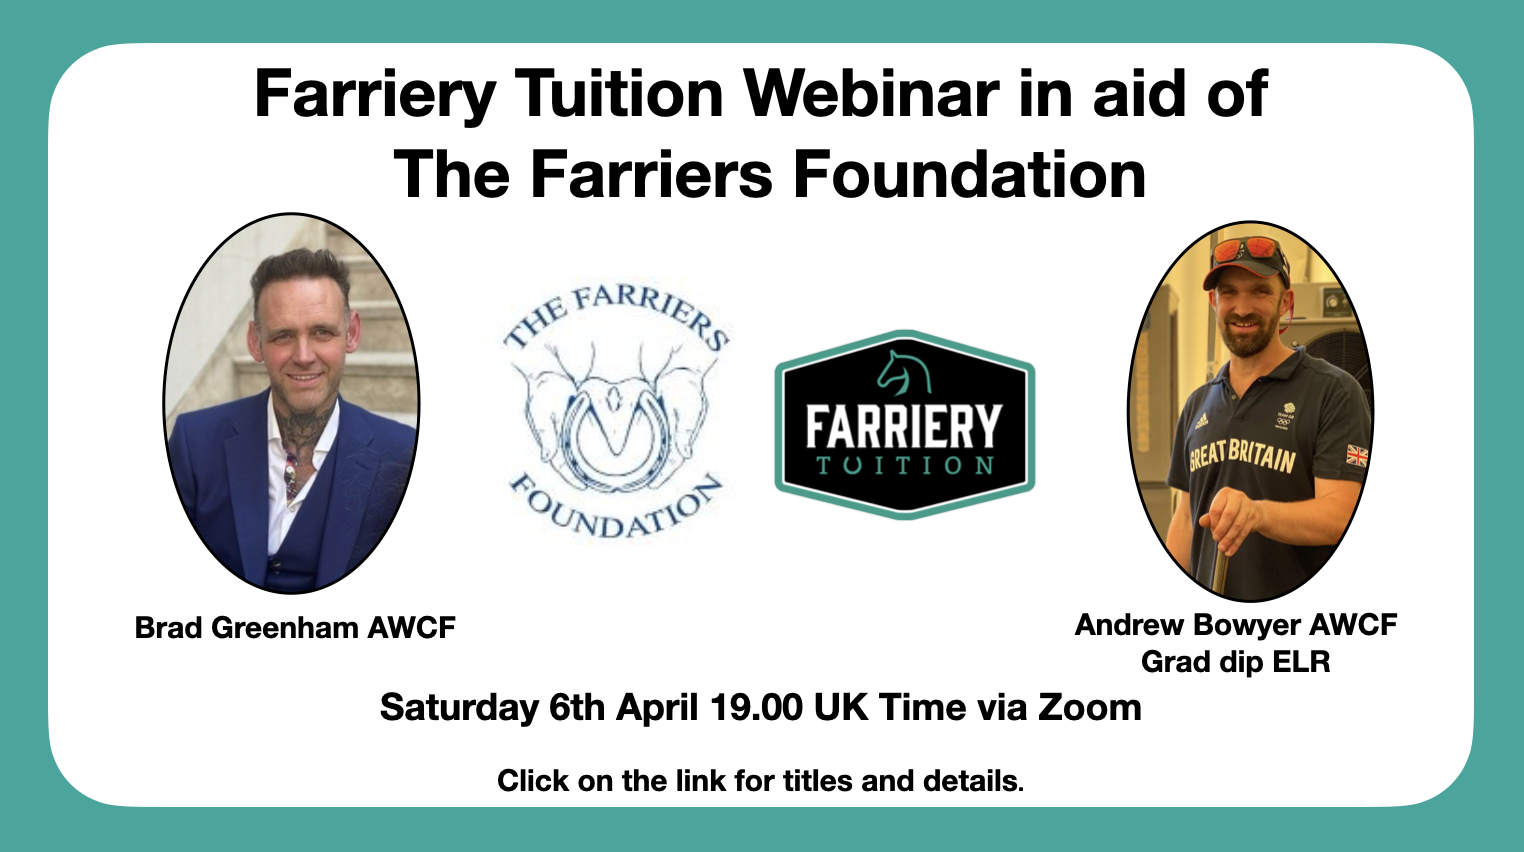 Farriery Tuition Webinar in aid of The Farriers Foundation